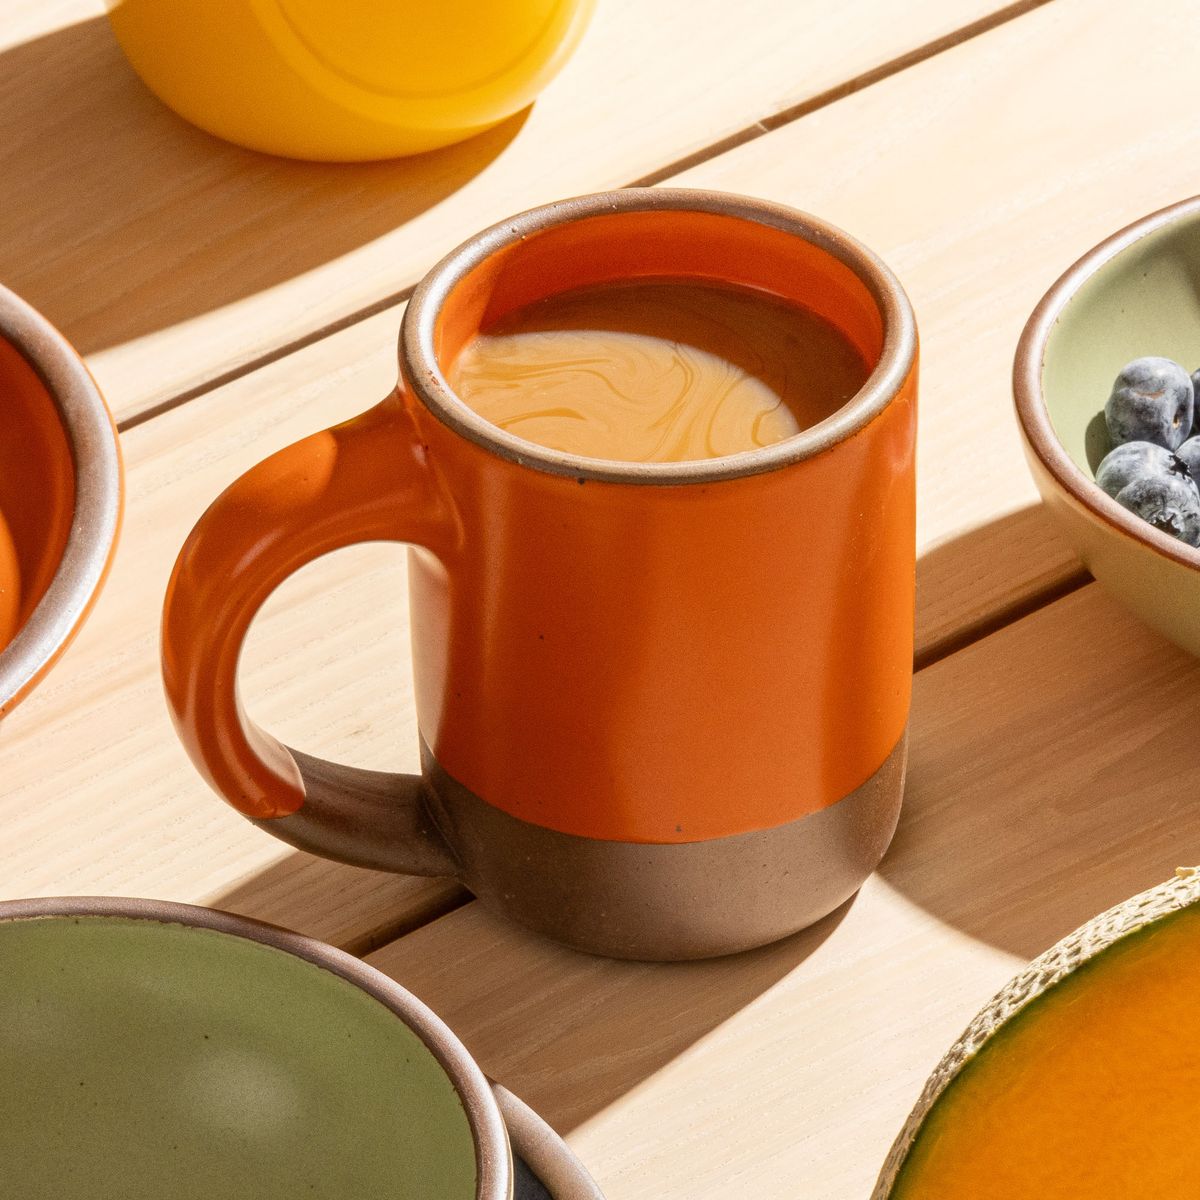 A medium sized ceramic mug with handle in a bold orange color featuring iron speckles and unglazed rim and bottom base, filled with coffee and sitting on a breakfast table